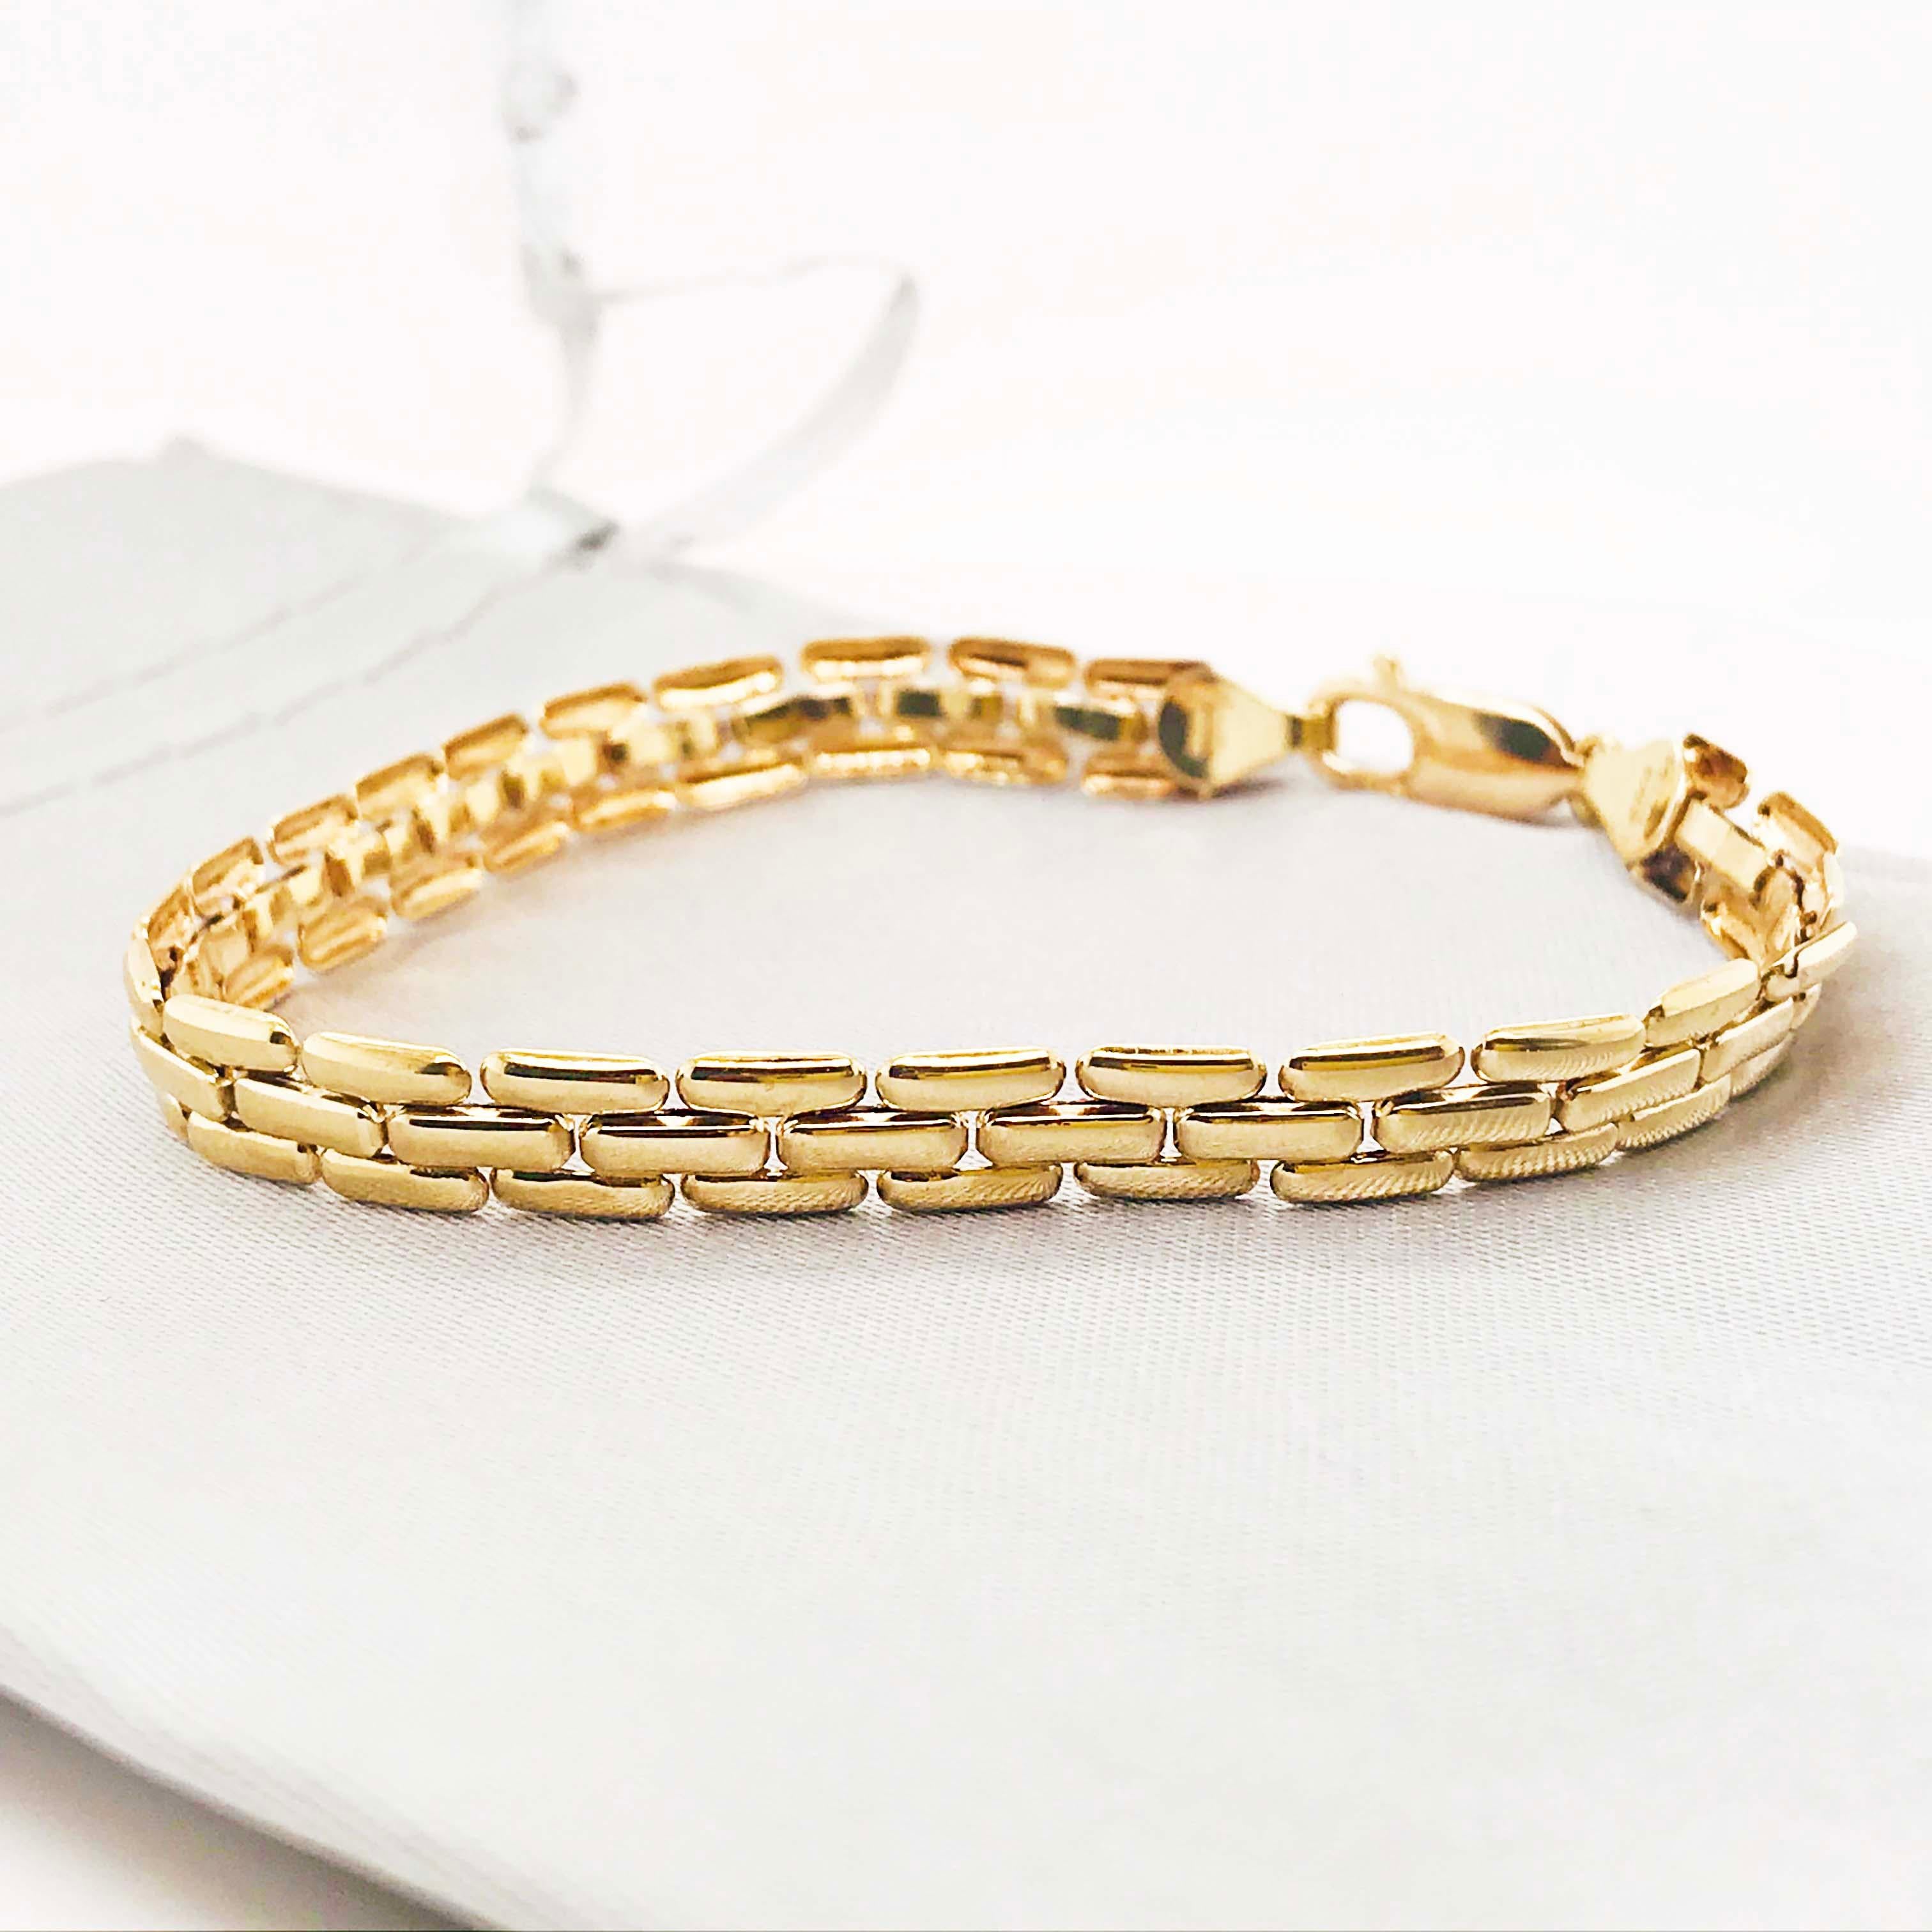 Gold Panther Chain Bracelet with Large Lobster Clasp, 14 Karat Yellow Gold 5